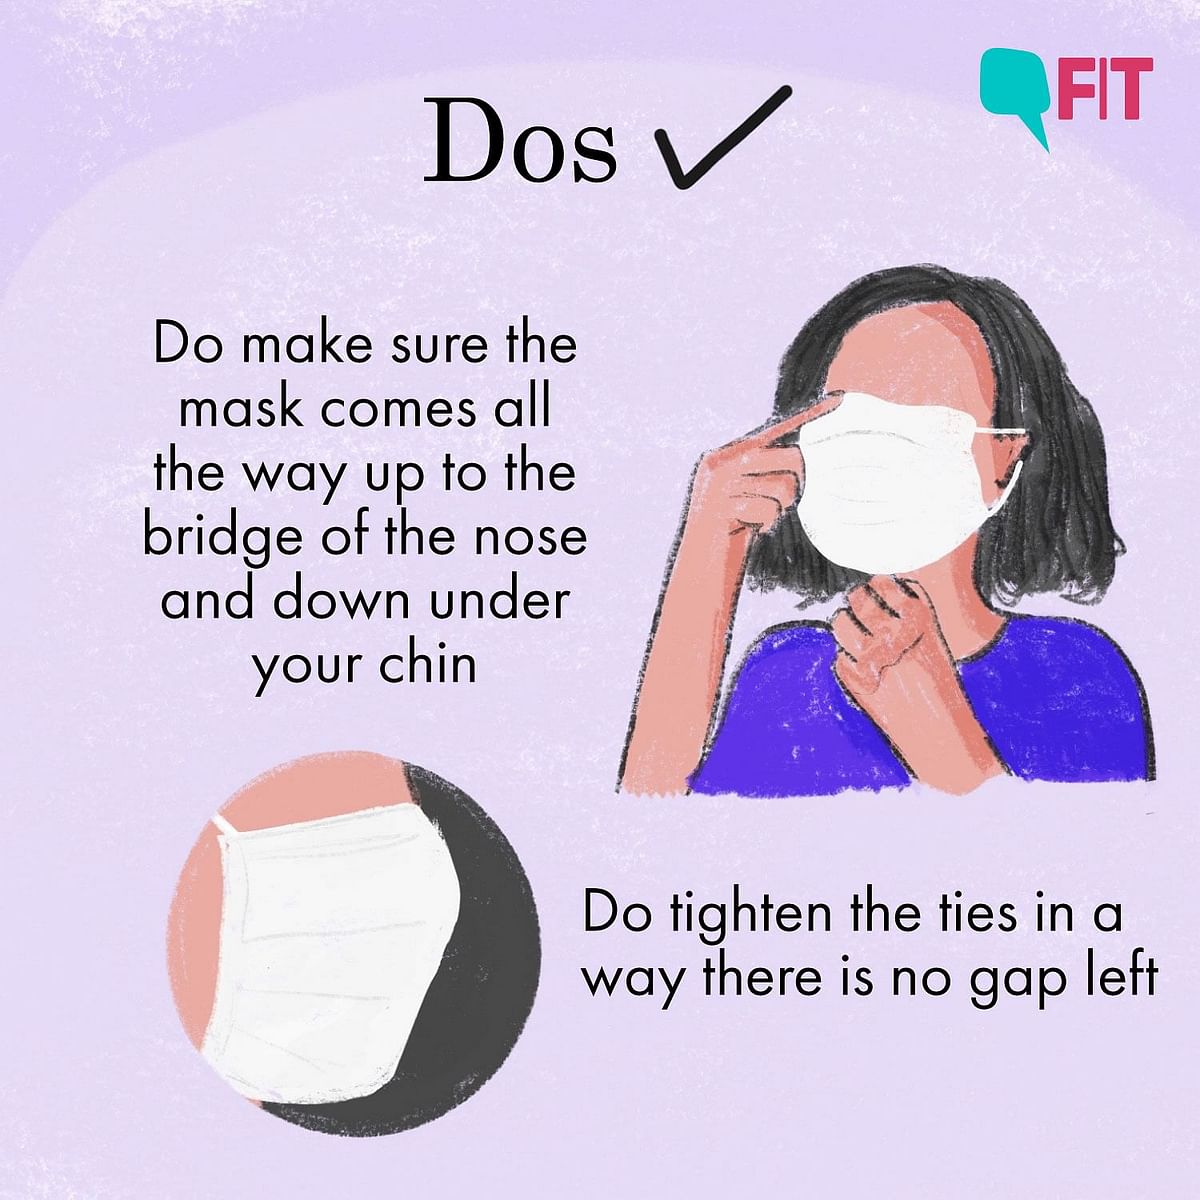 There has been a constant swirl of misinformation around masks. We got experts to answer your queries.